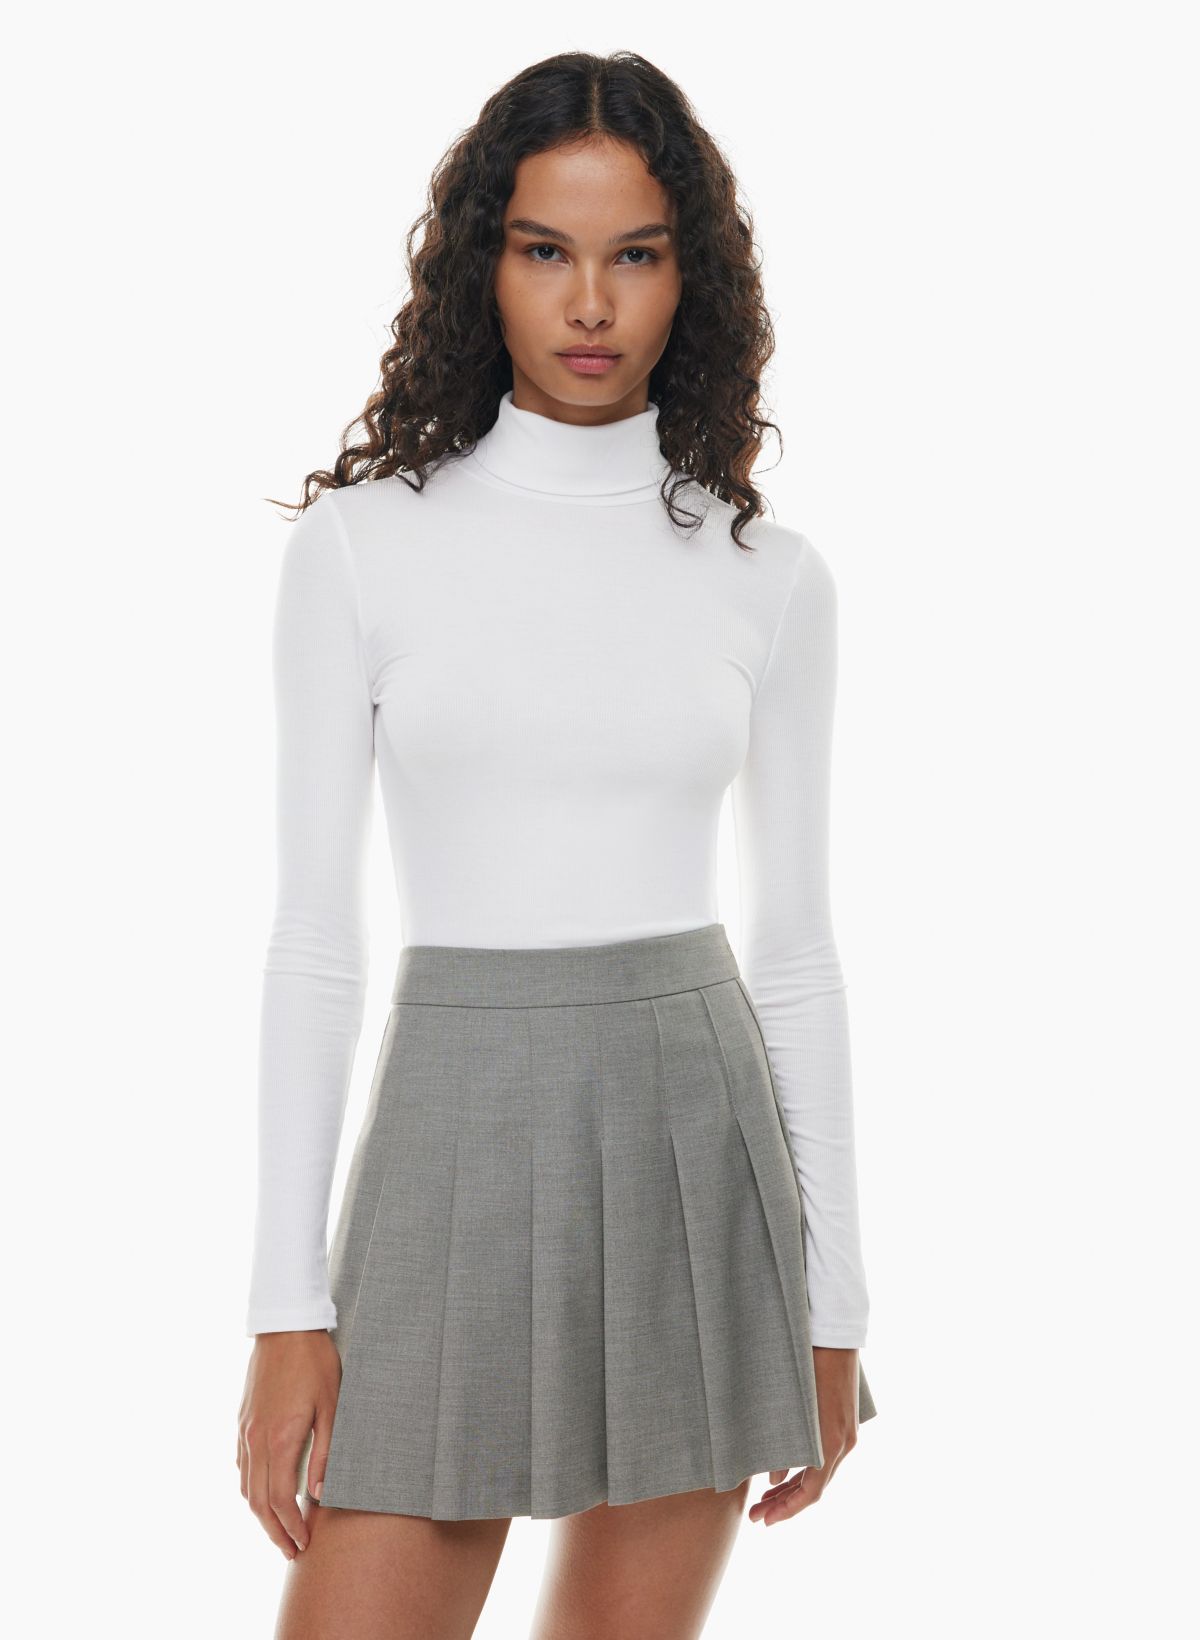 A Cotton Mock Turtleneck Is the One Spring Shirt You Absolutely